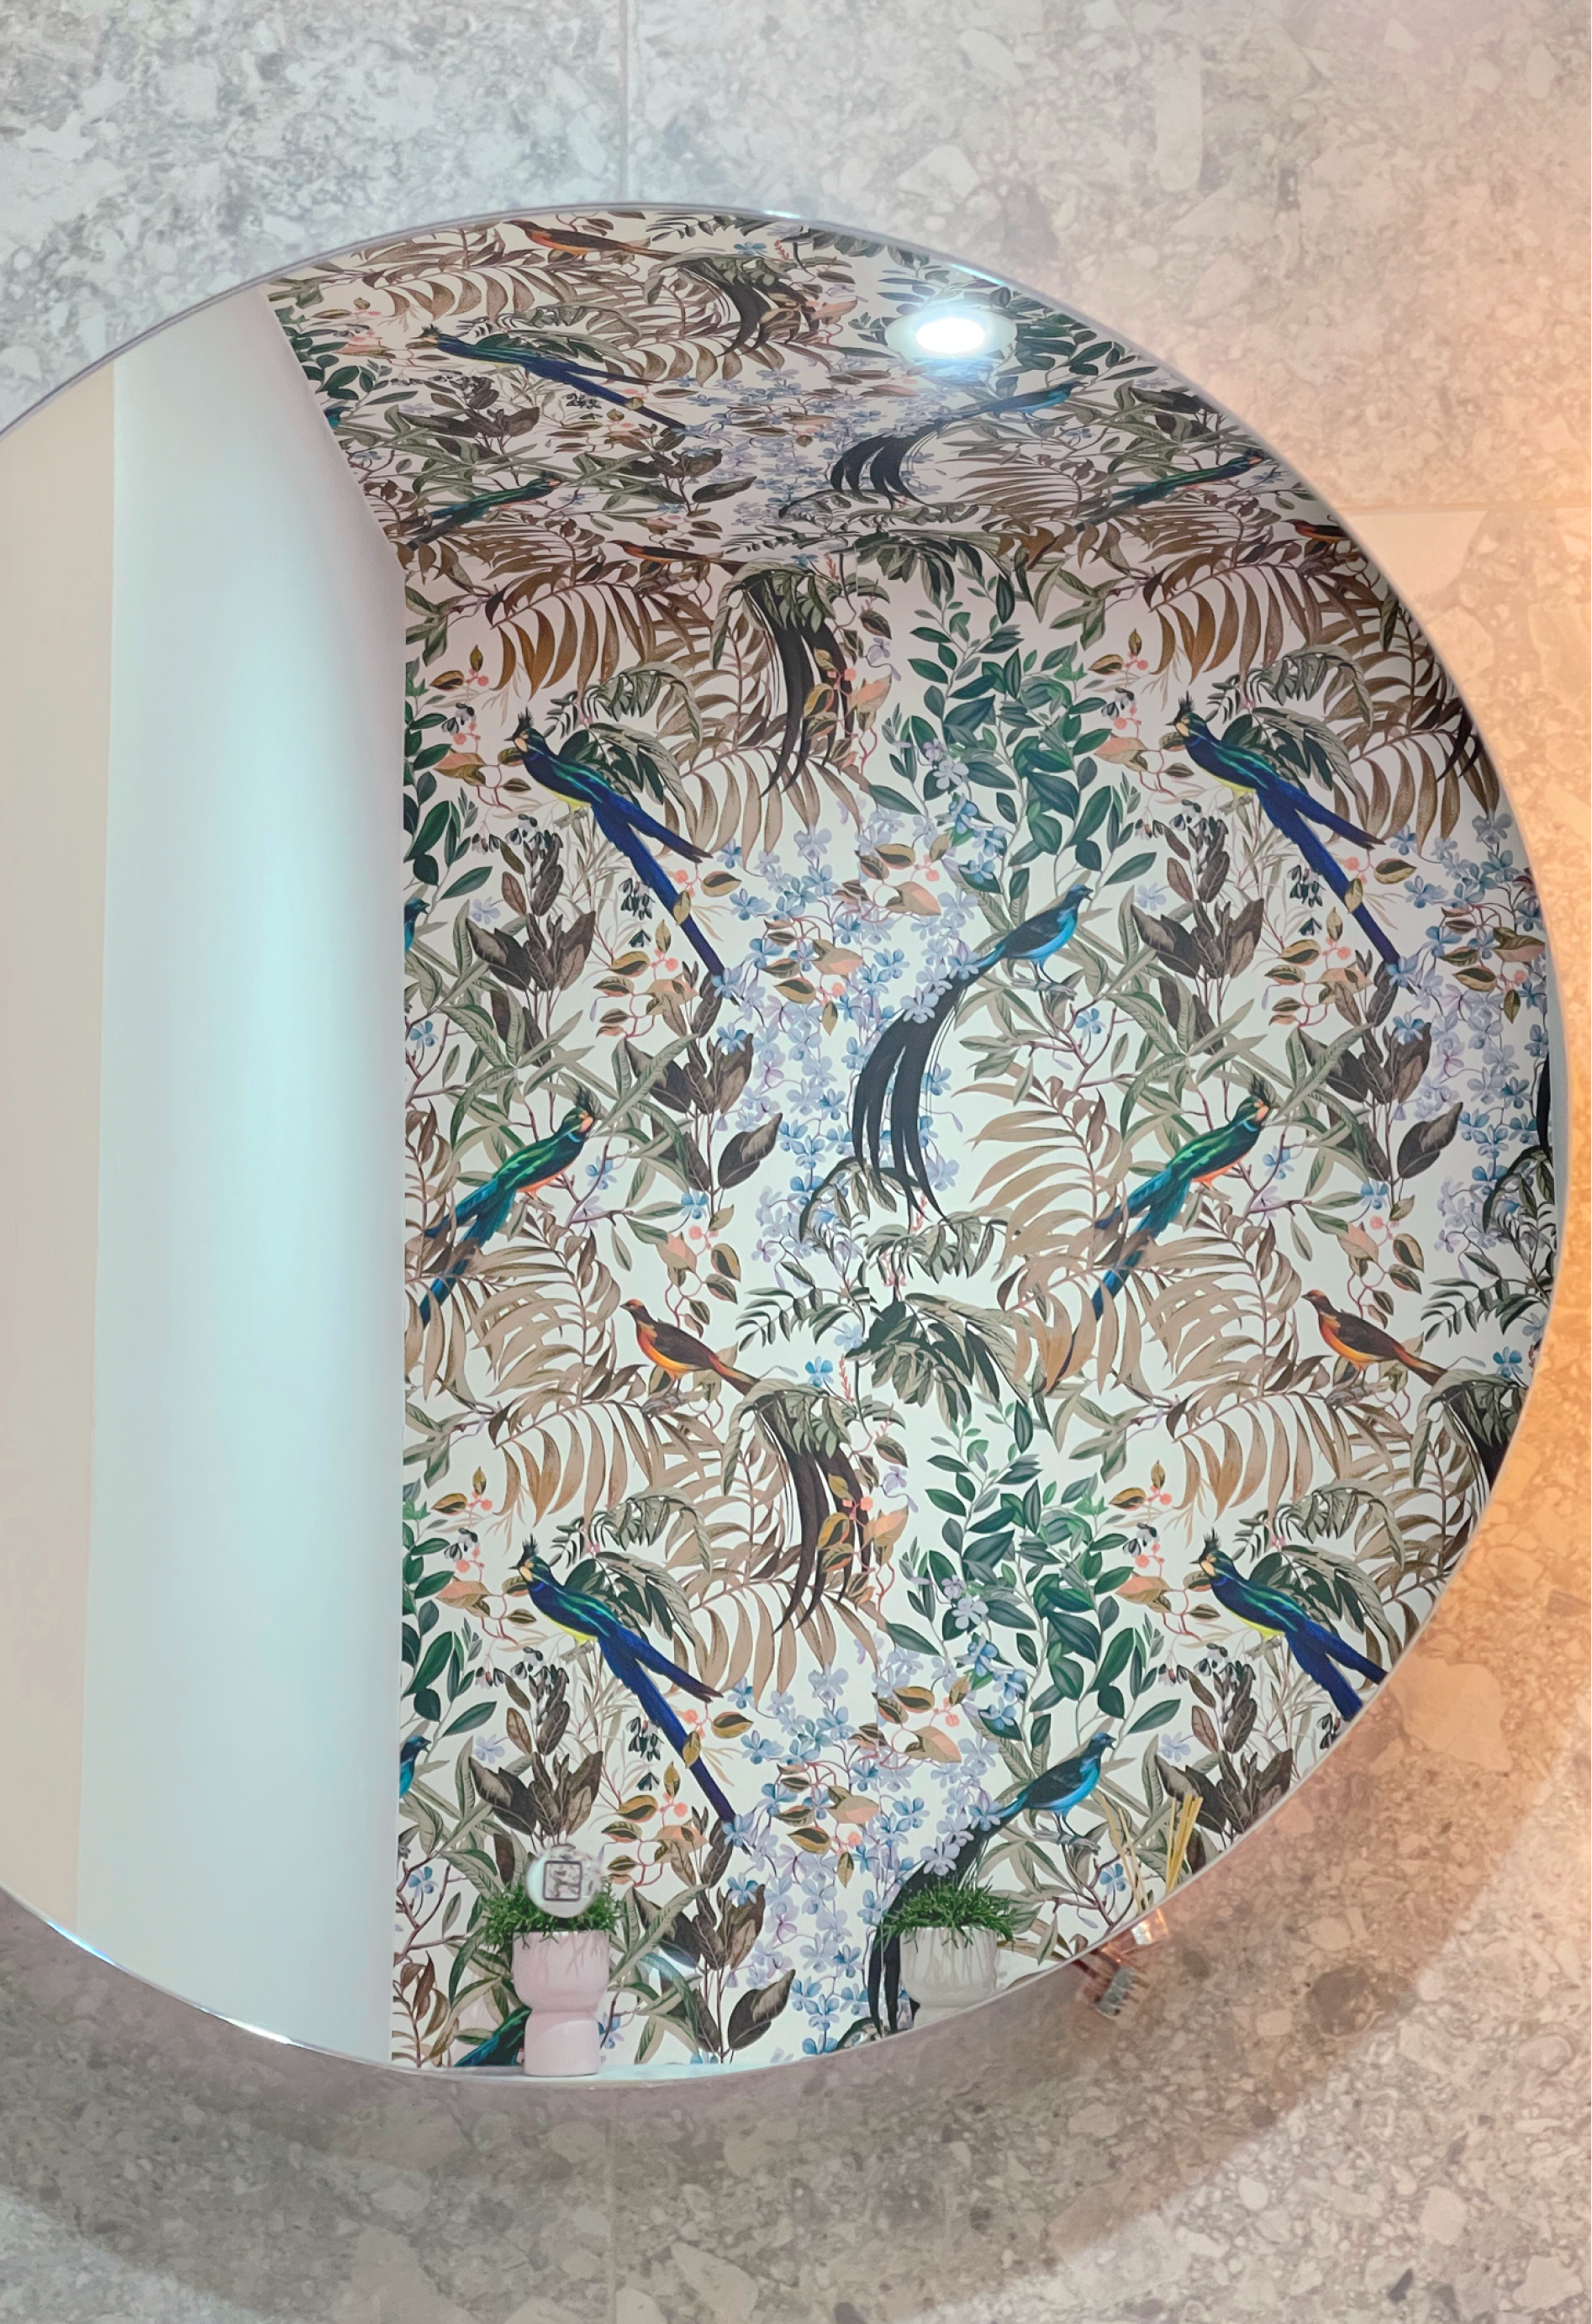 Large modern mirror reflecting botanical design from Deus ex Gardenia of Resplendent Woods Wide Wallpaper in Shaded White. Photo by Aesthetics Lab in Belgravia.